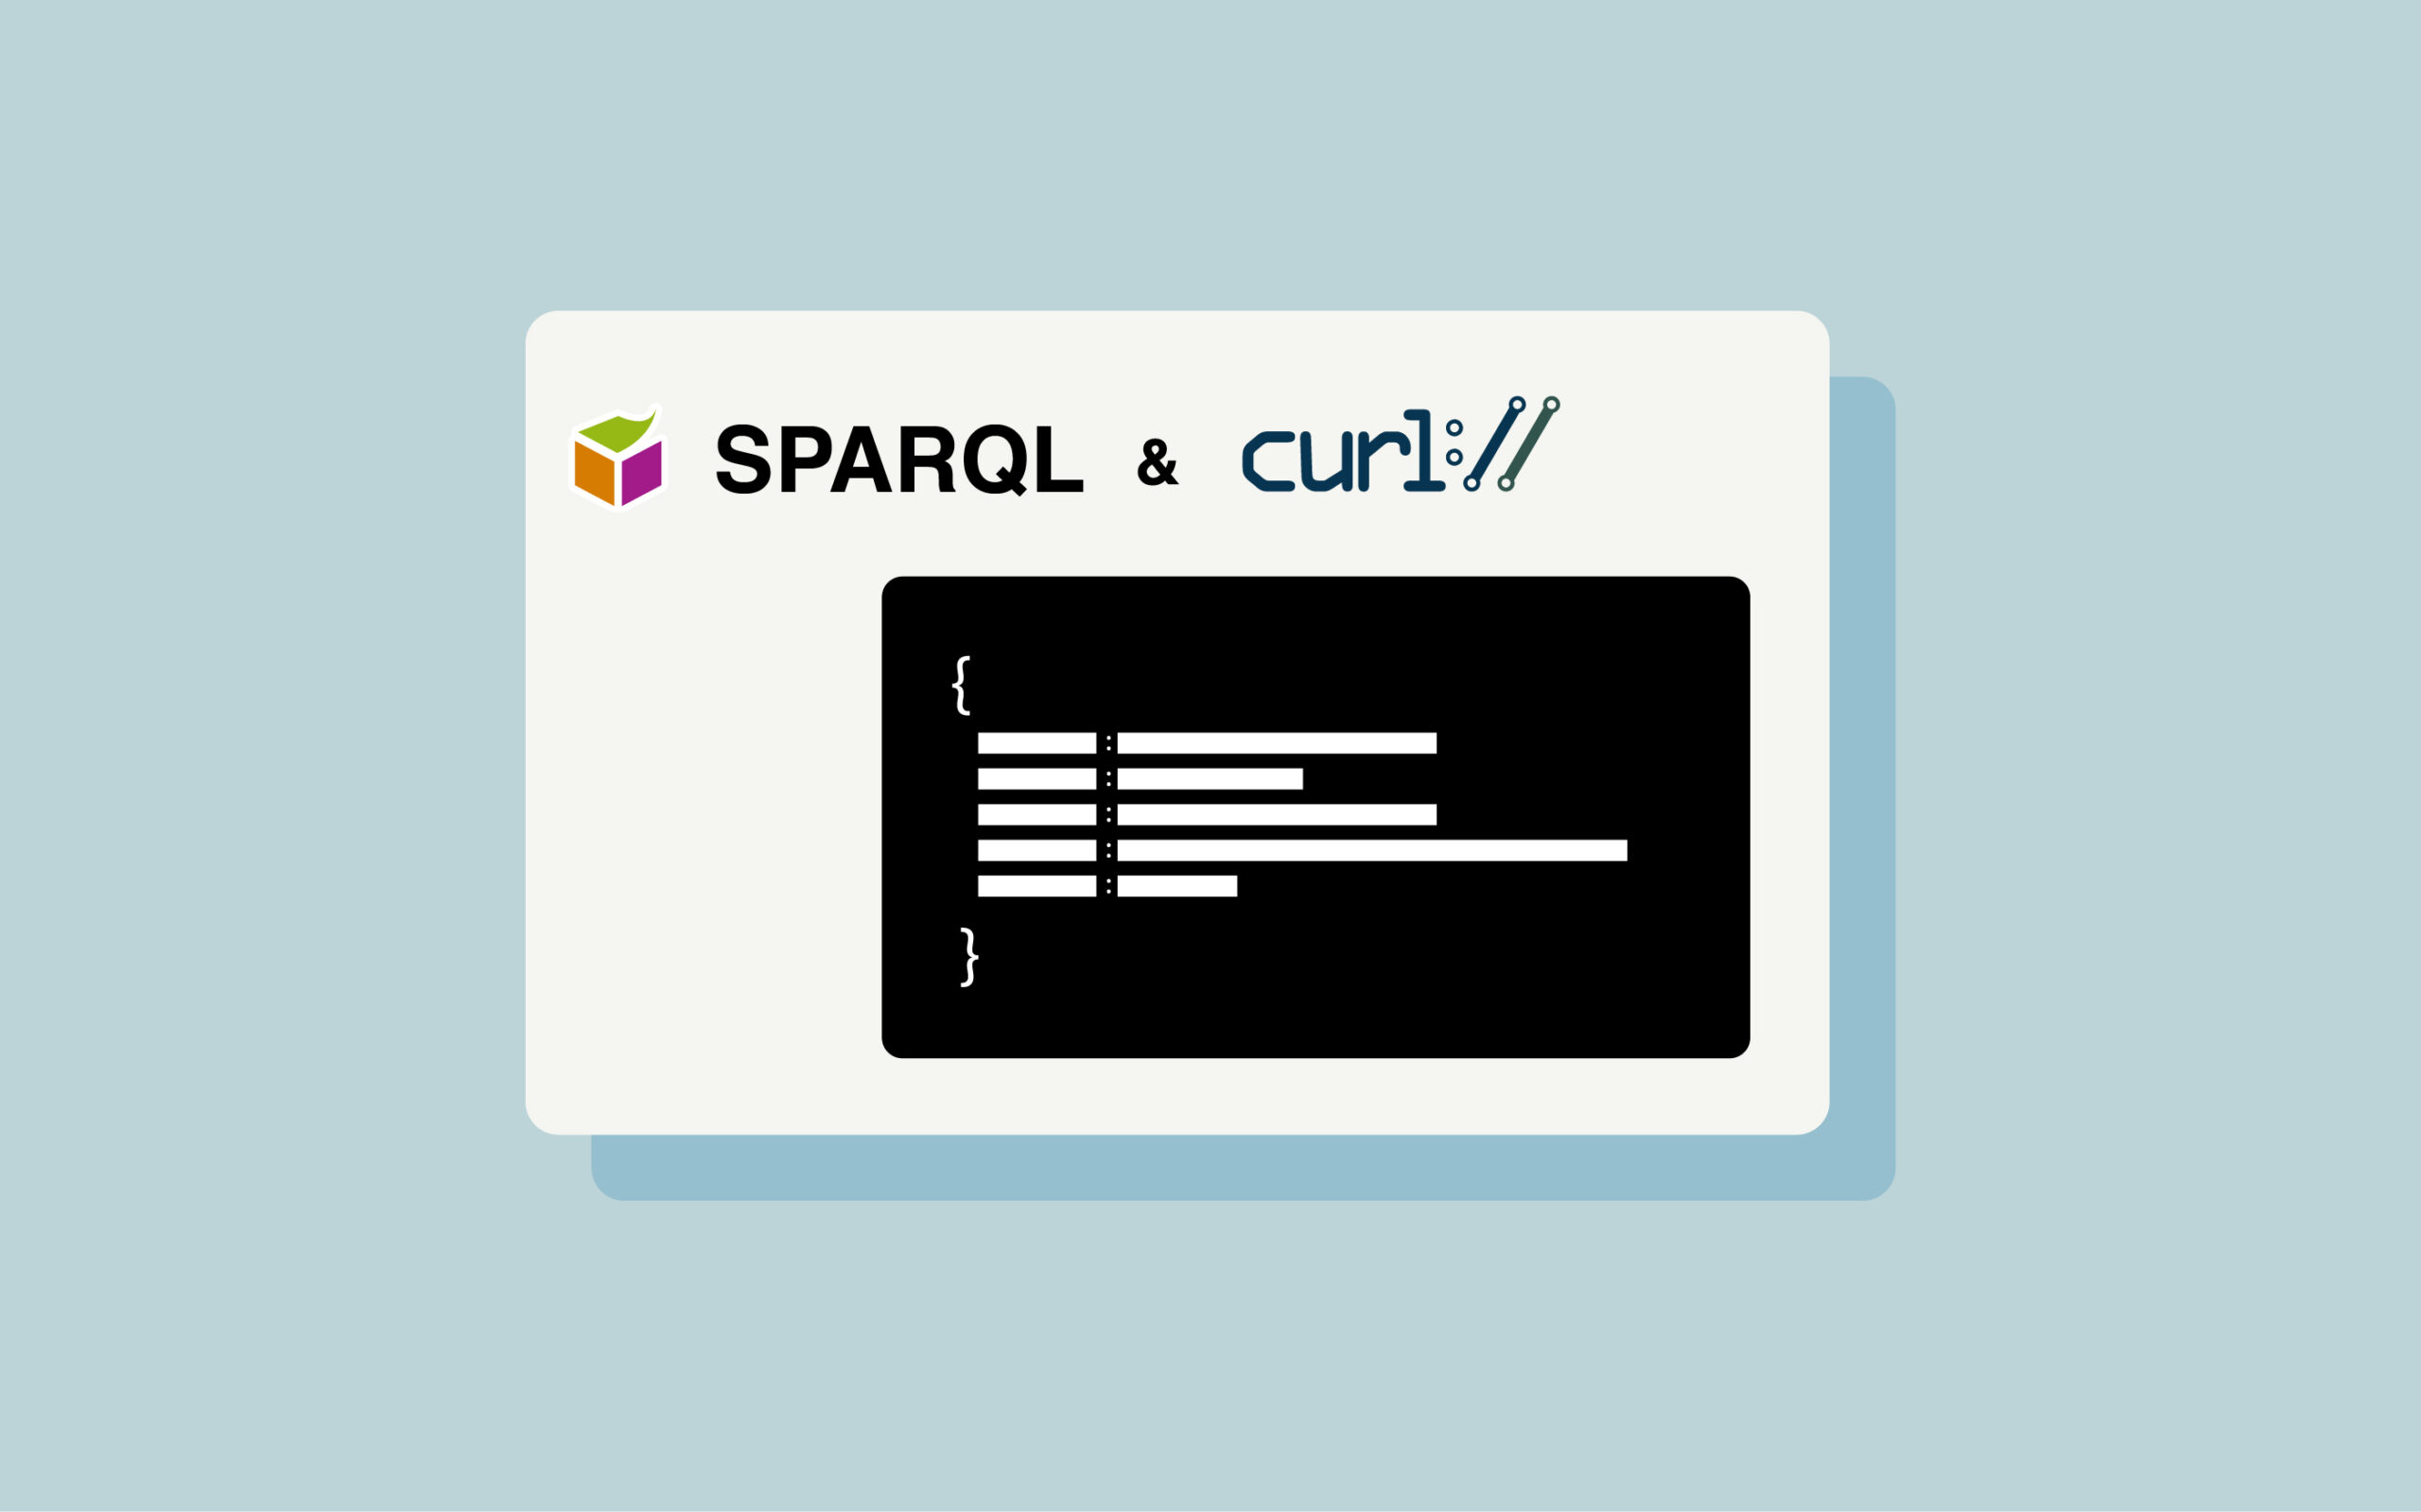 graphic of a grey card on a blue background containing the "SPARQL" logo next to the "Curl" logo, with underneath, a black box illustrating an open code window